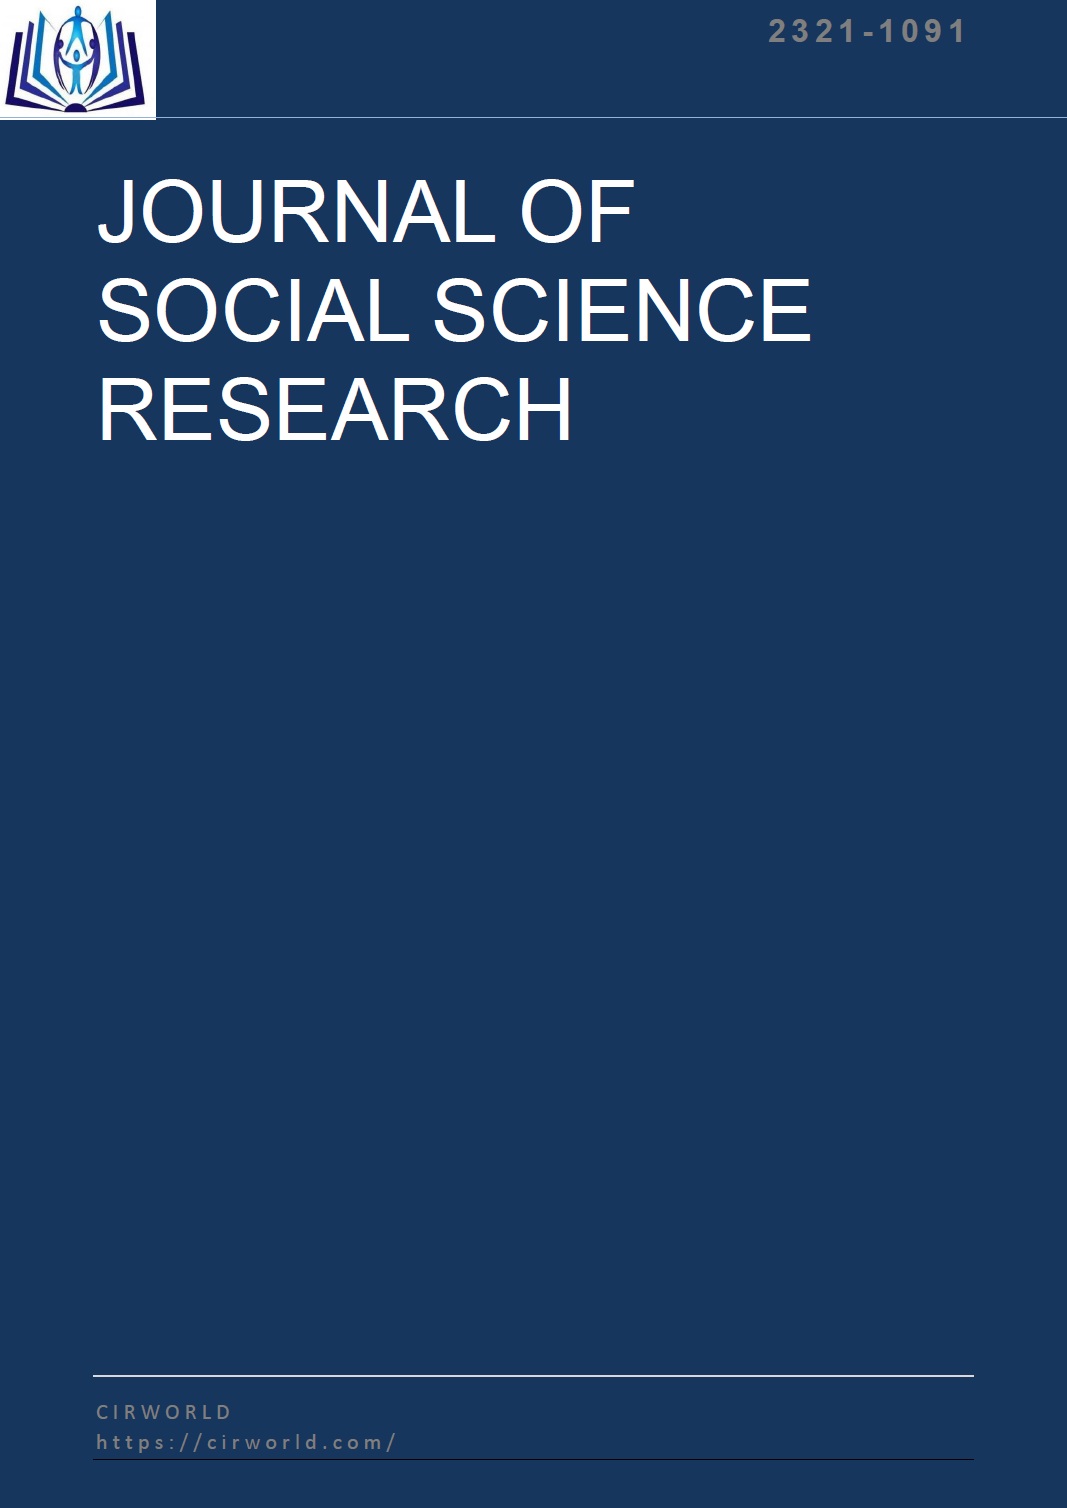 research review journal of social science